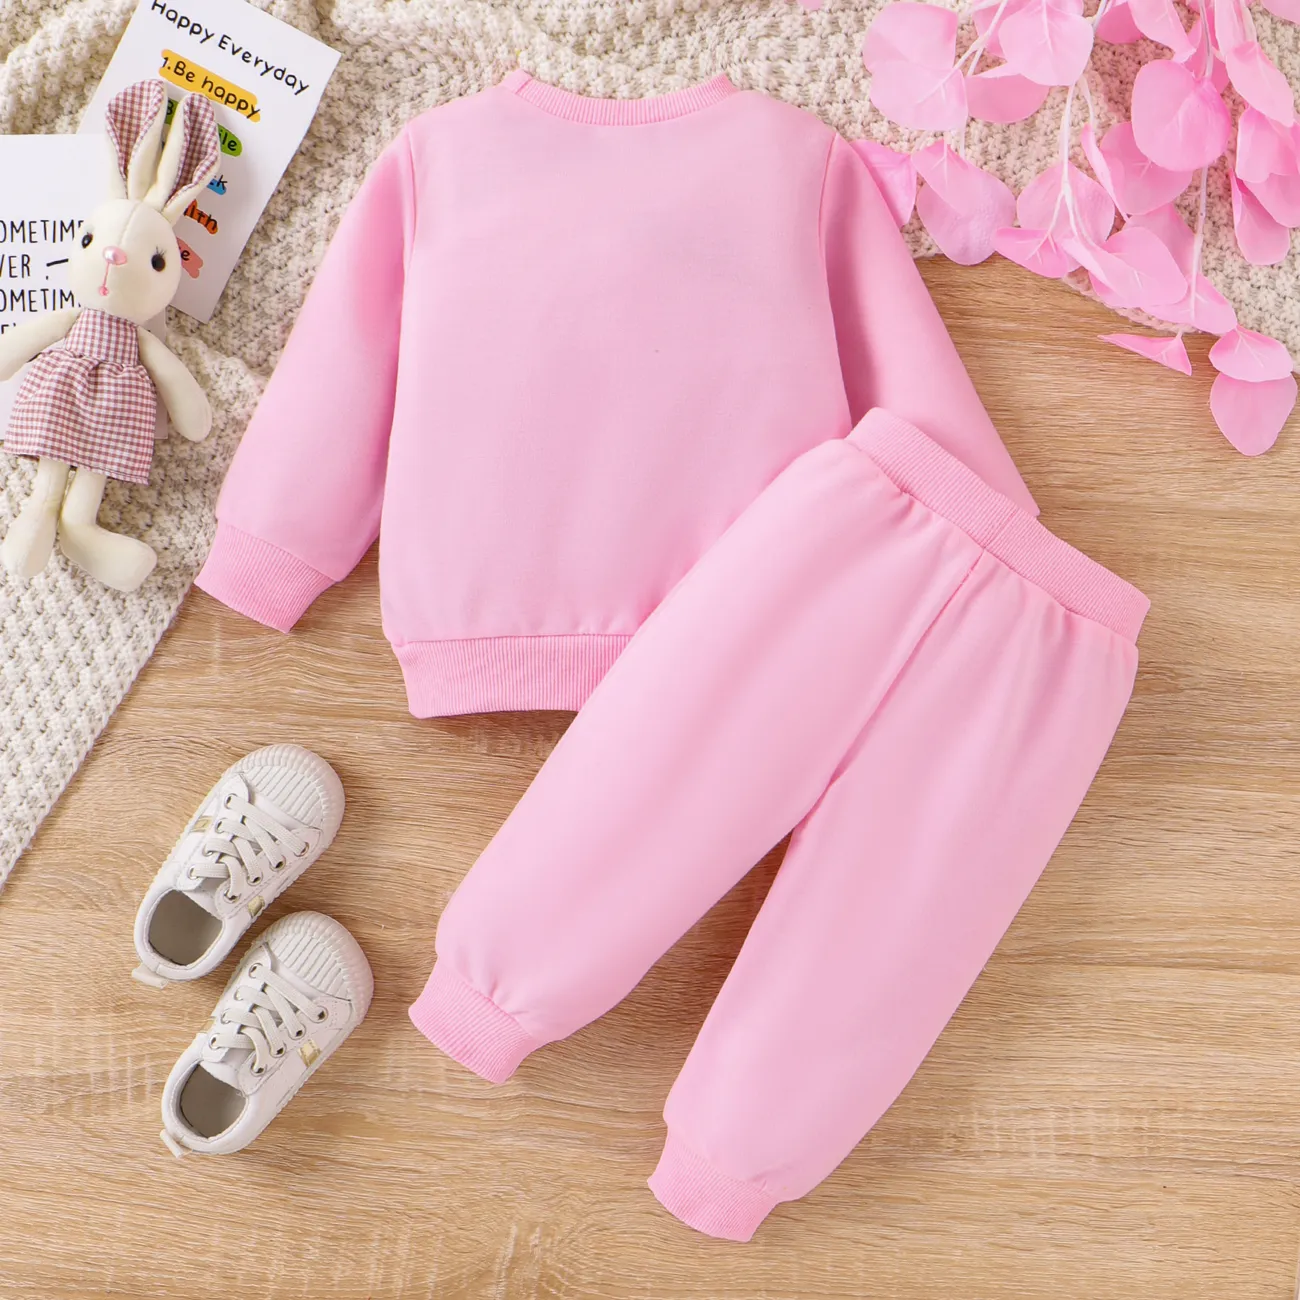 Baby Girl Cute Rabbit Animal print 3D Embroidered Sweatsuit Set Only $11.99  PatPat US Mobile